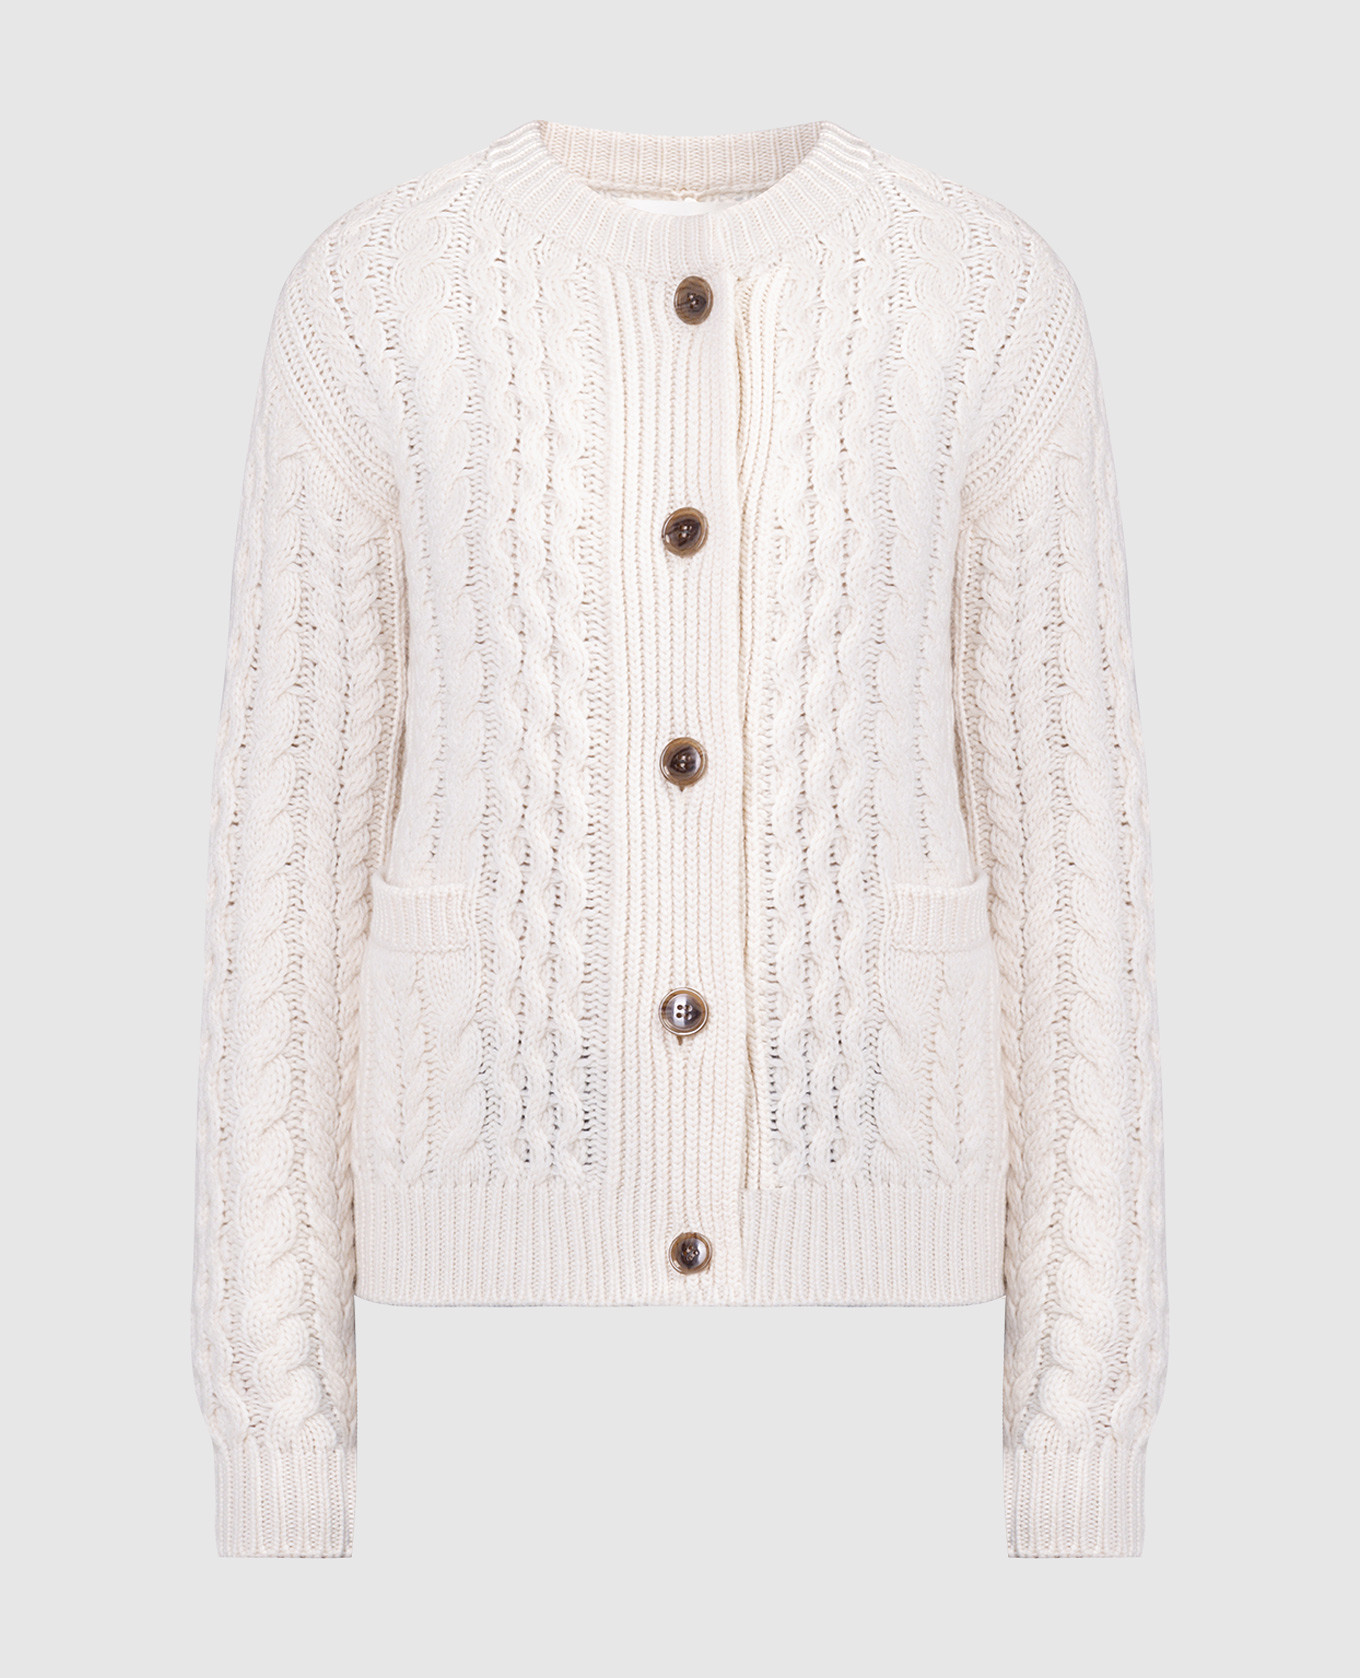 White cashmere cardigan in a textured pattern